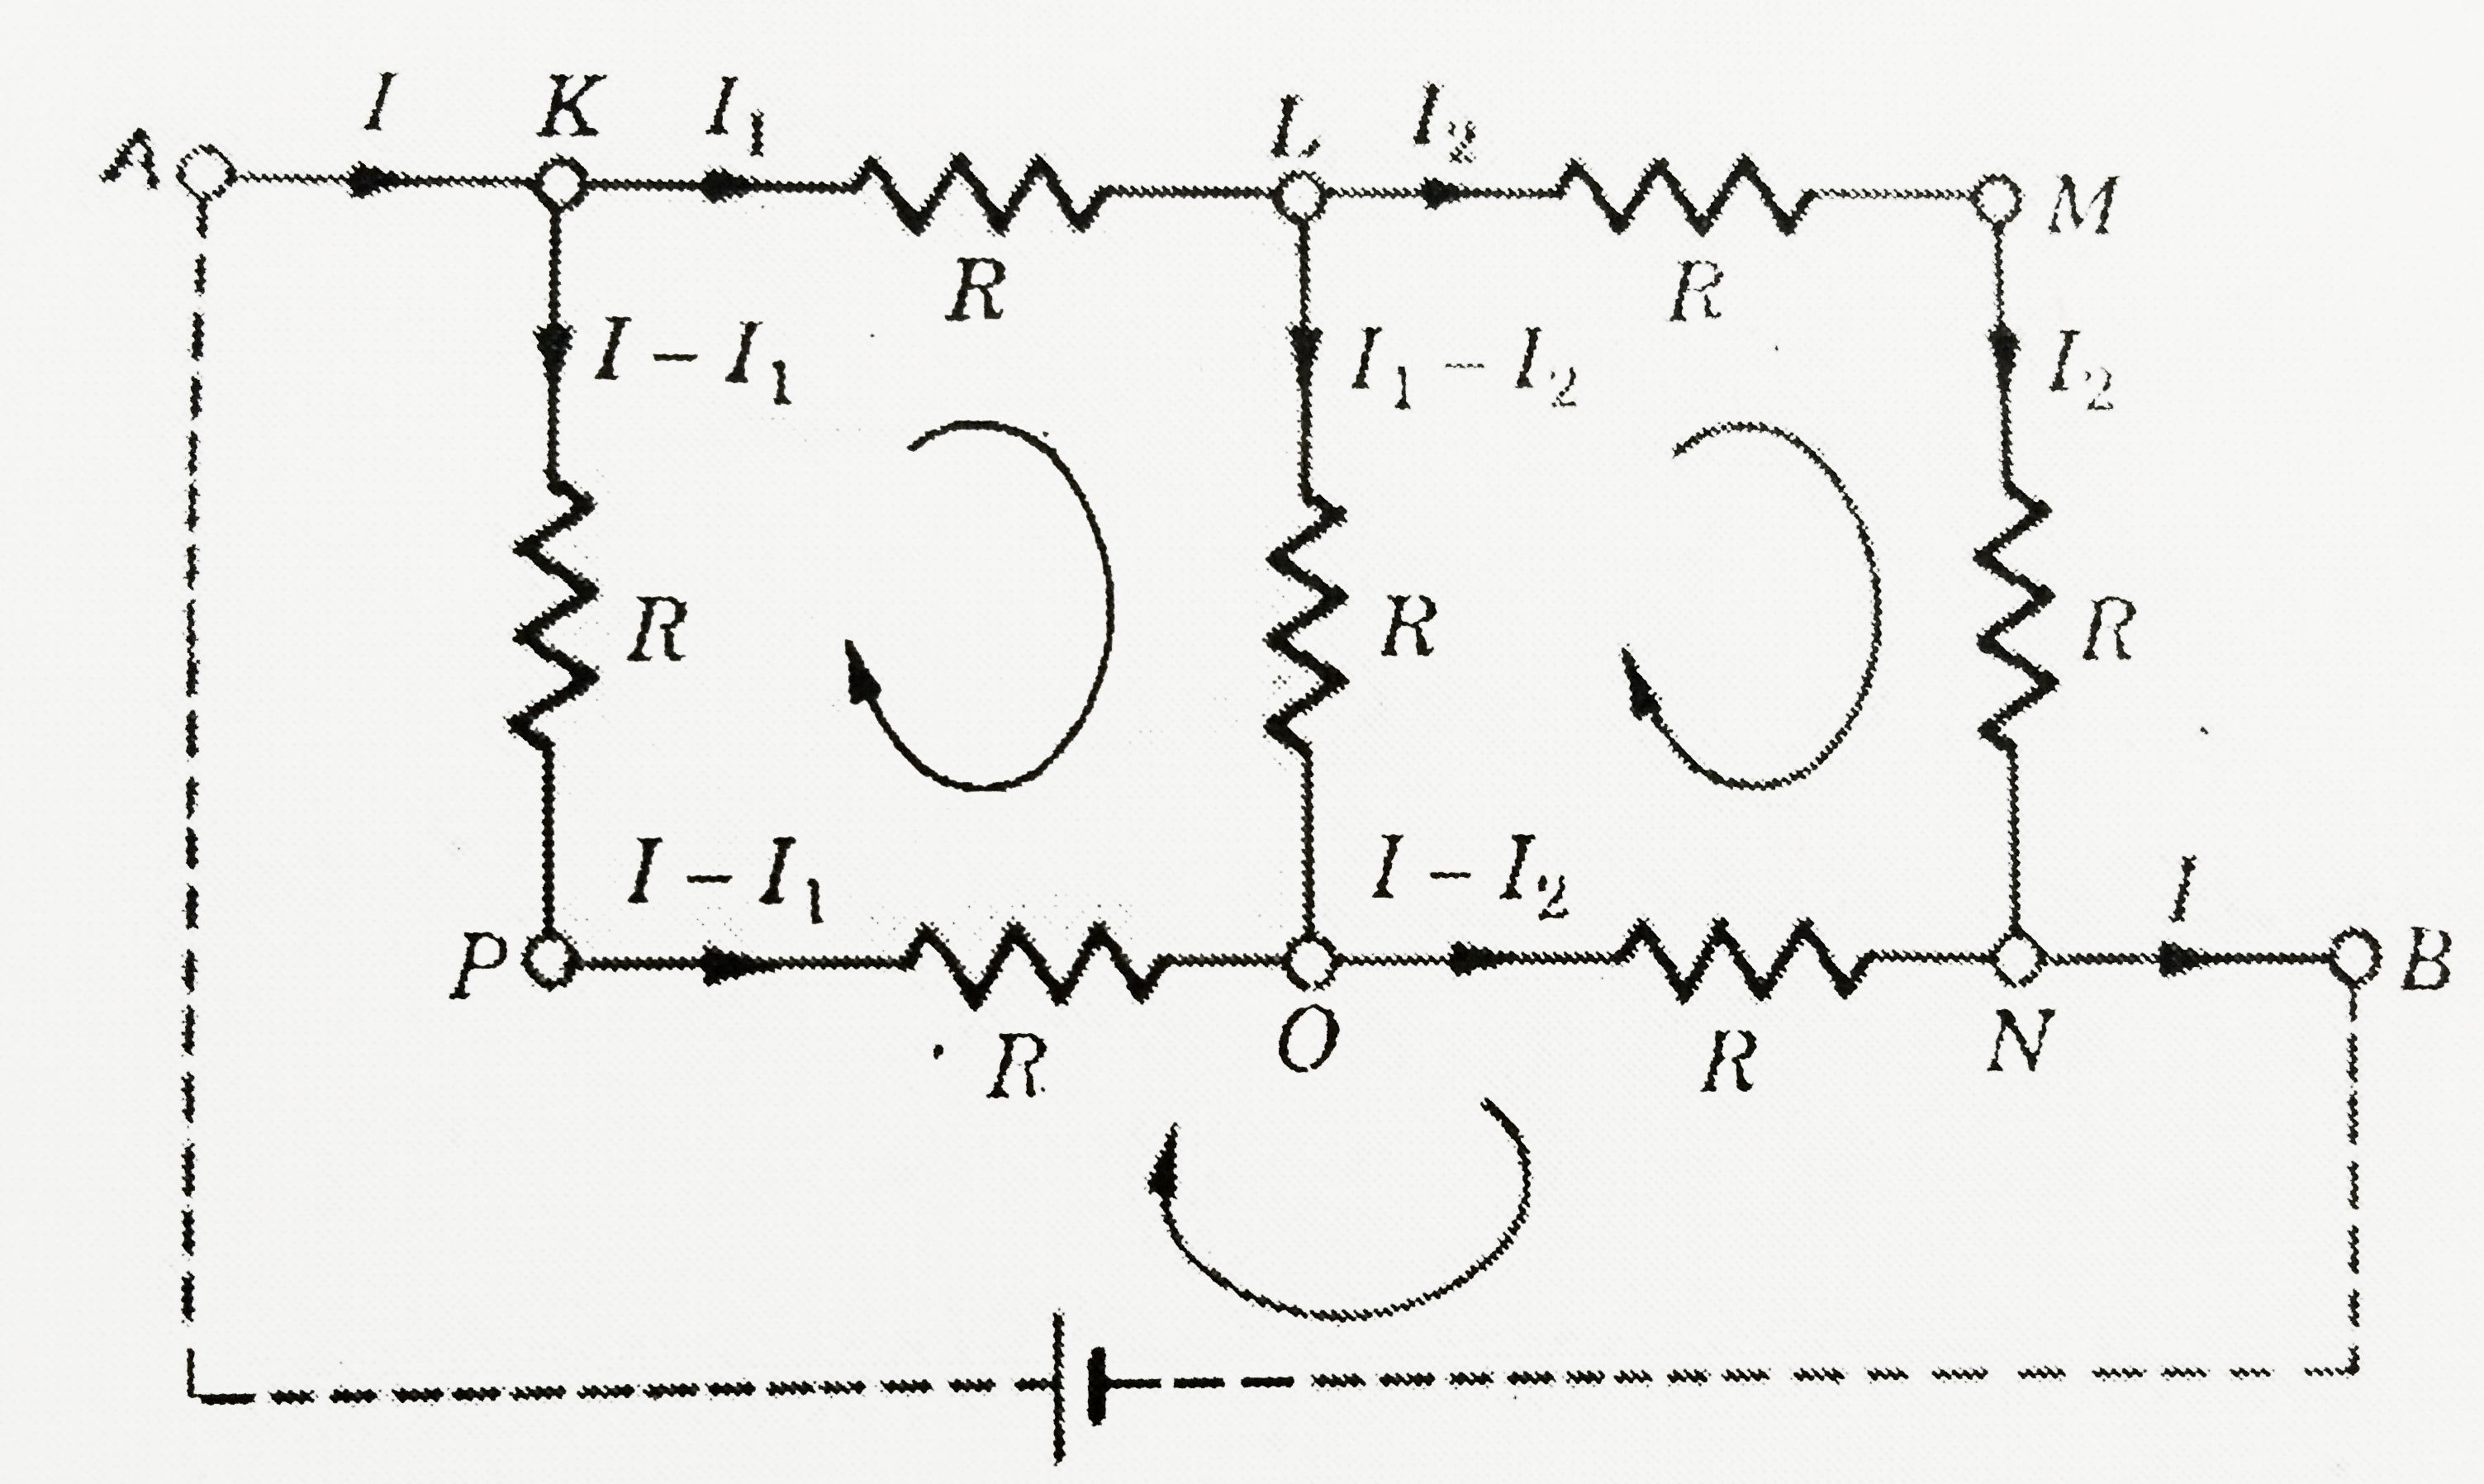 Find the equivalent resistance between the terminals A and B in the network shown figure. Given each resistor R of 10Omega.